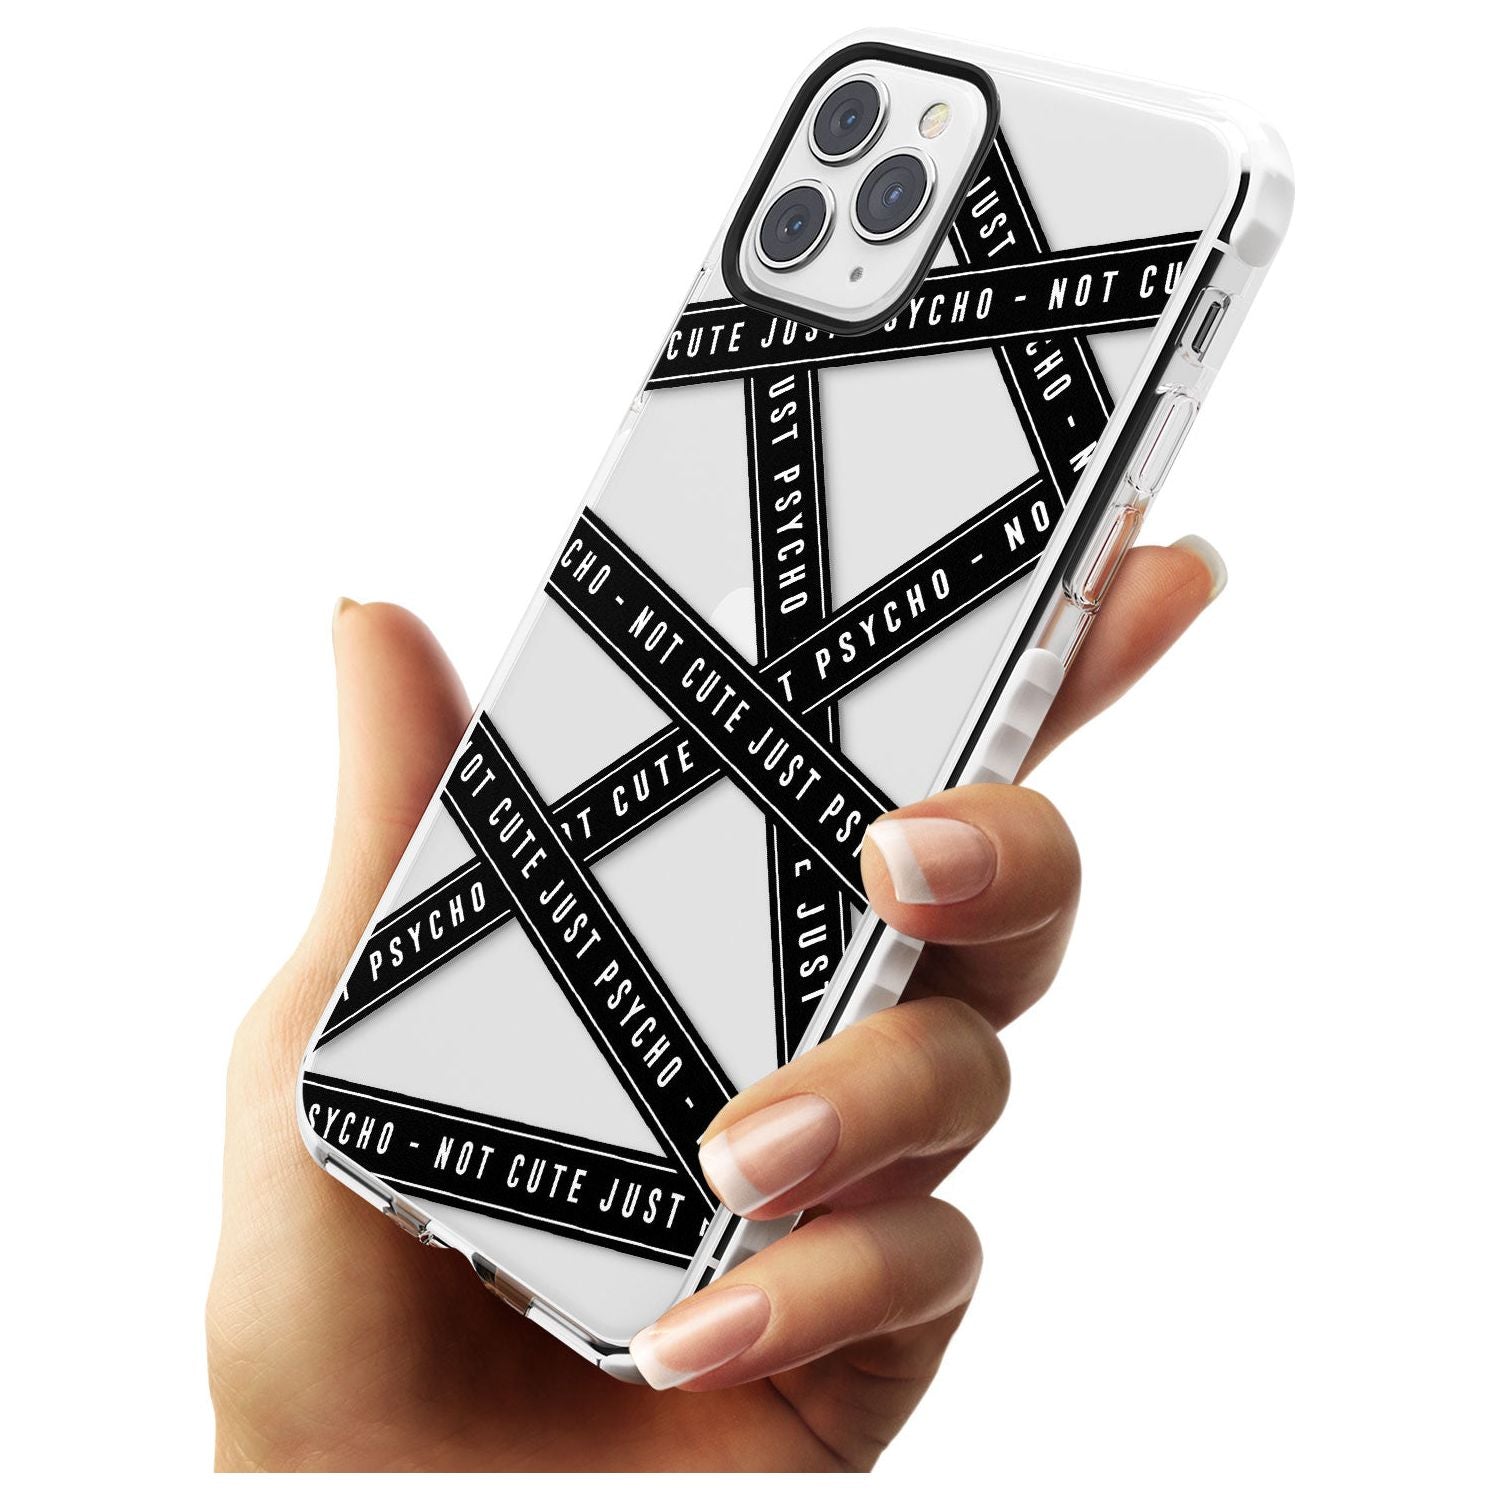 Caution Tape (Clear) Not Cute Just Psycho Impact Phone Case for iPhone 11 Pro Max